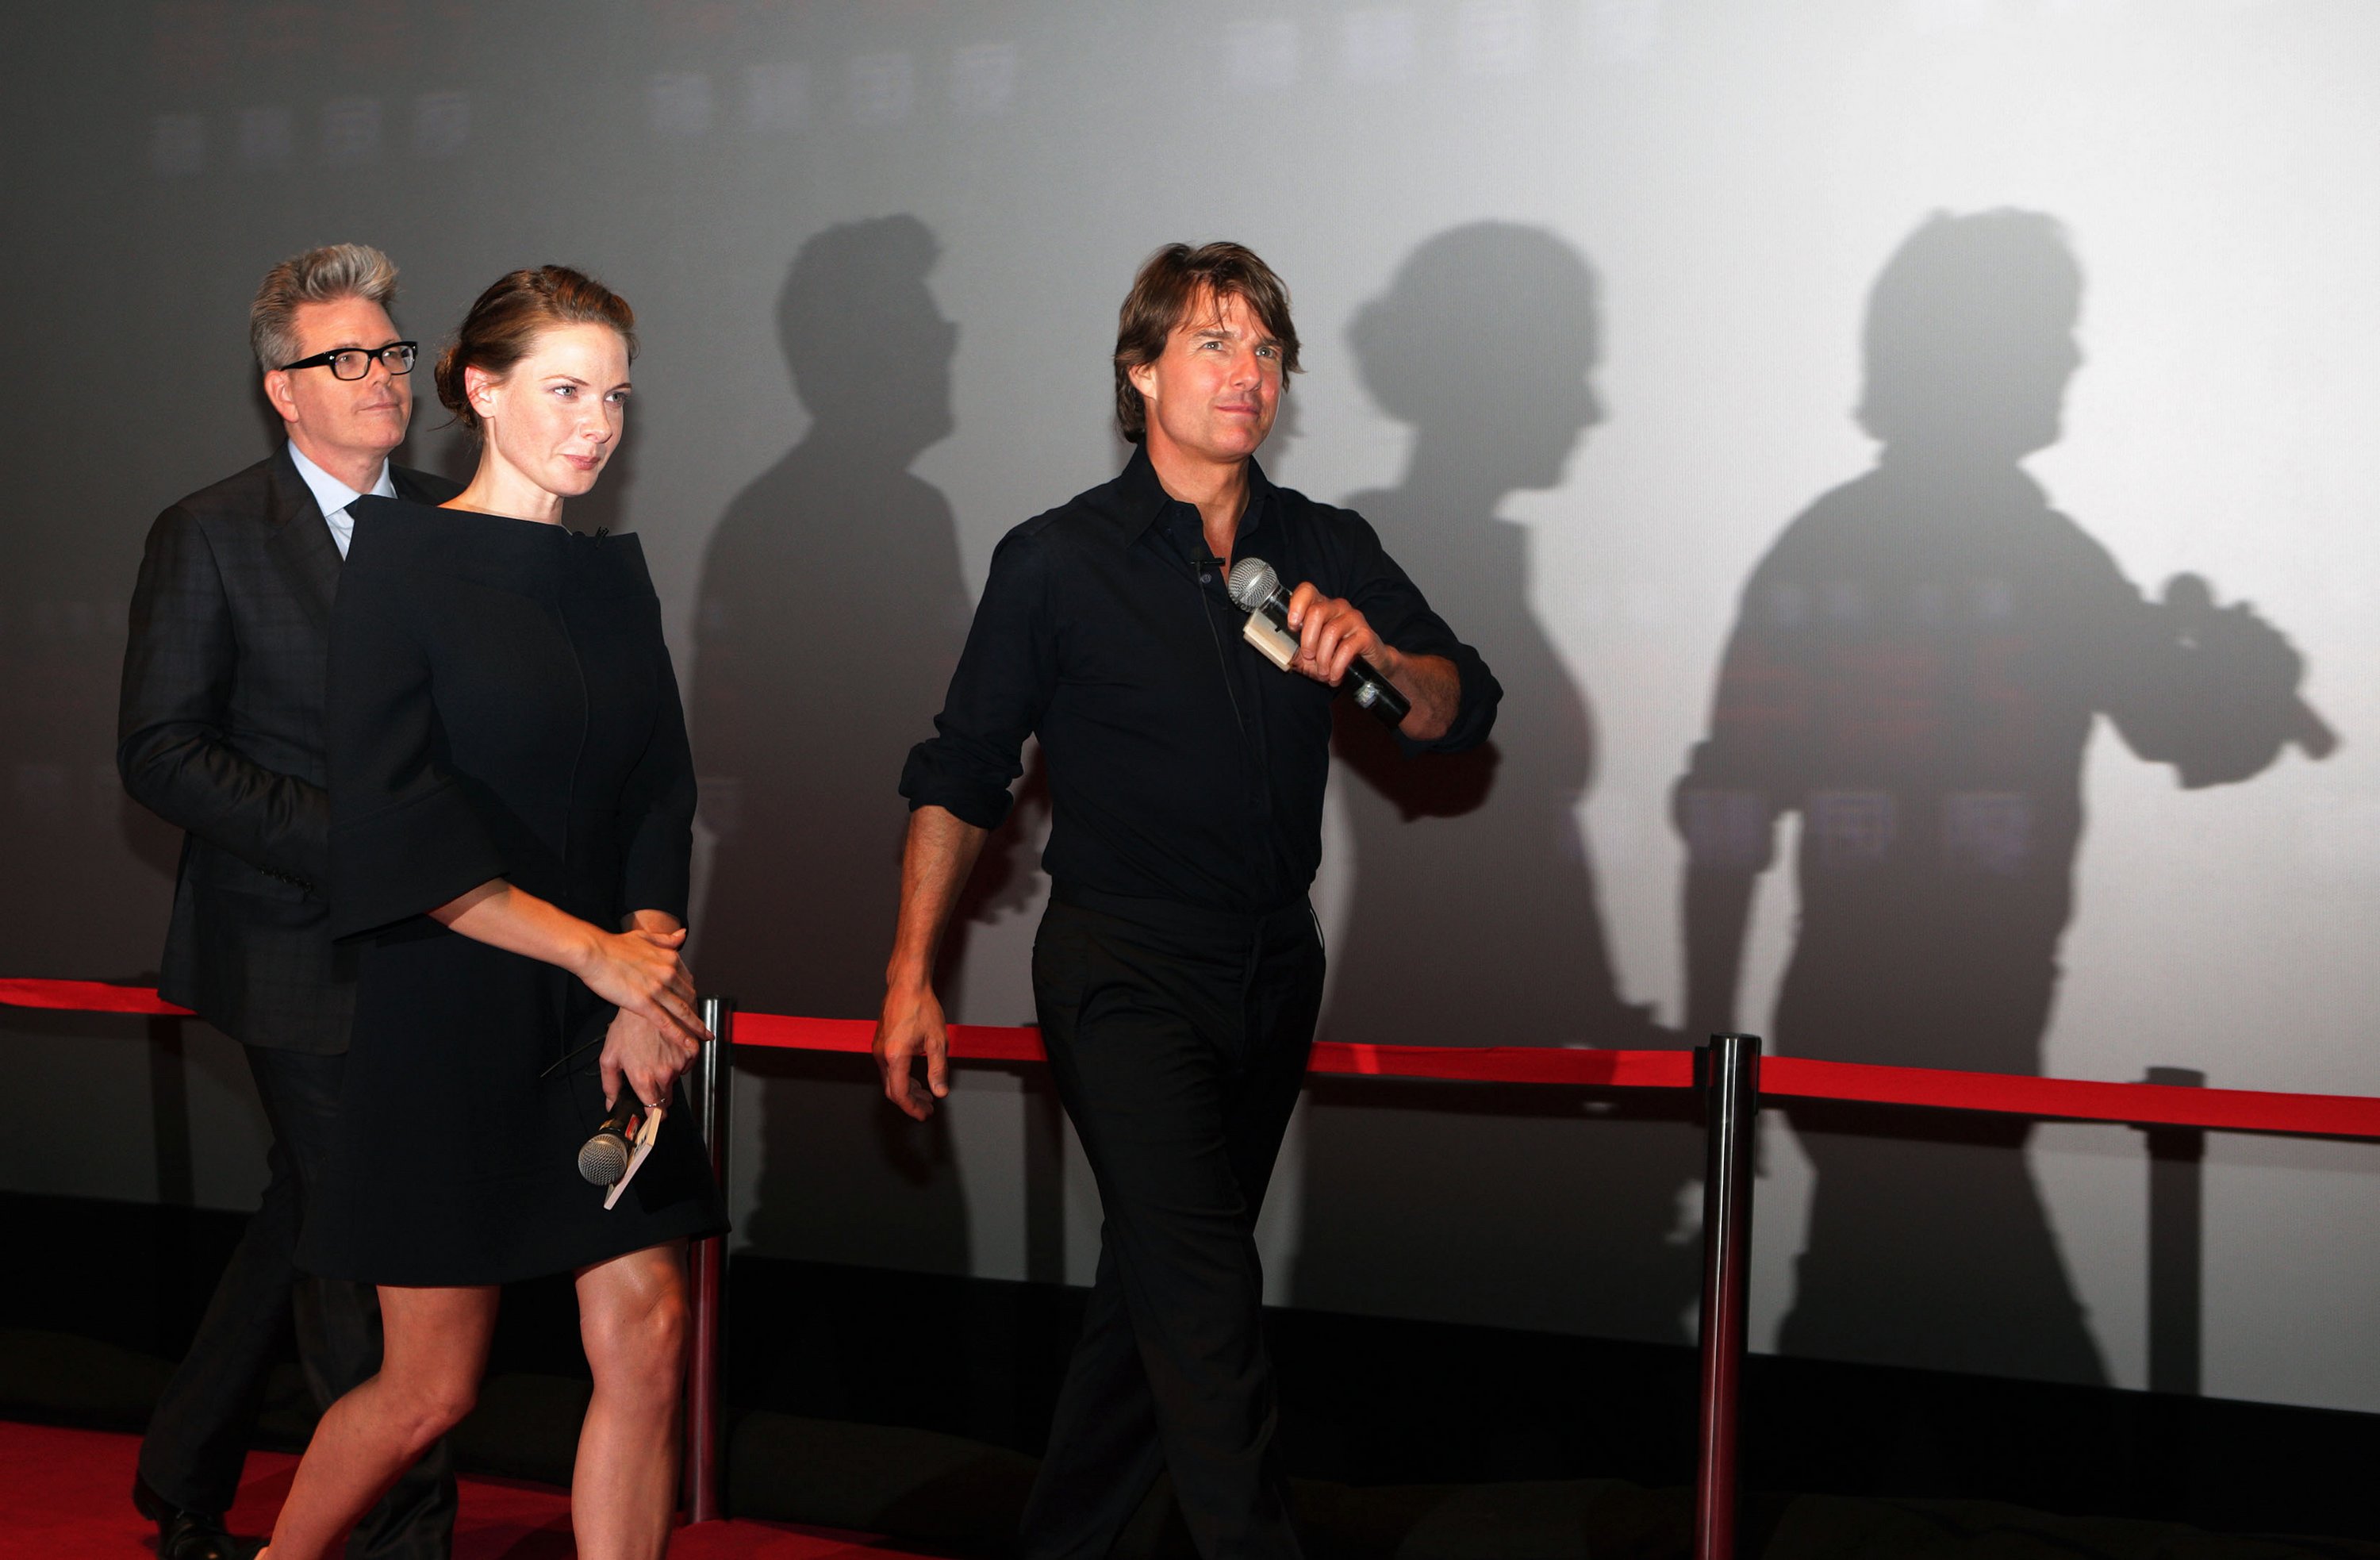 mission-impossible-rogue-nation-shanghai-premiere-sept7-2015-106.jpg